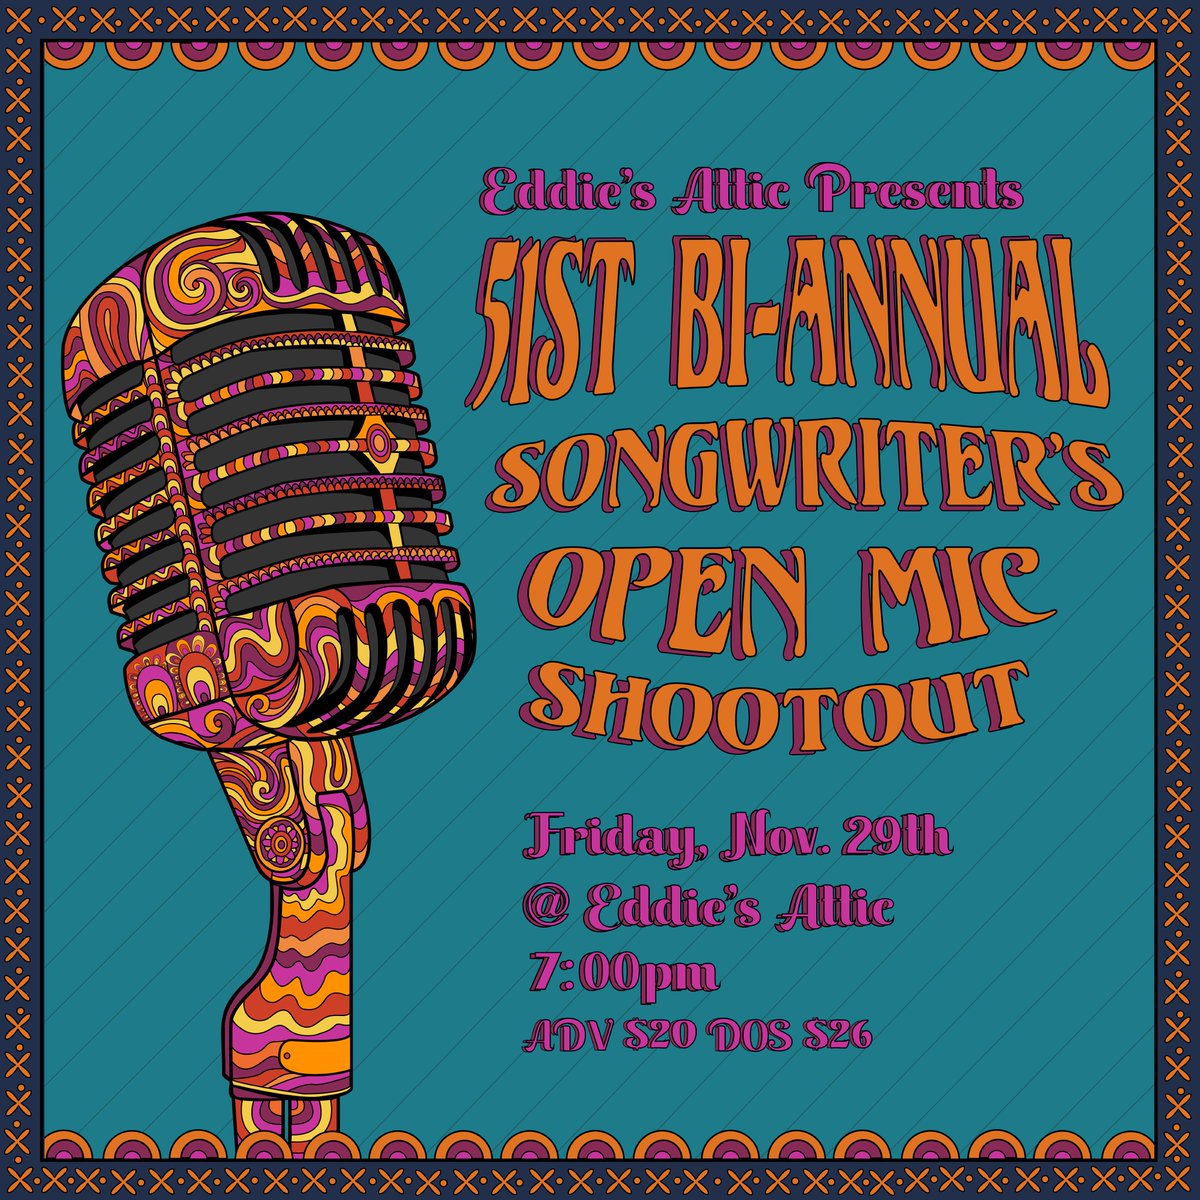 Get ready to hear some of your favs from our past Open Mics in the Open Mic Shootout next Friday(11/29) 🎸🎤 Featuring performances by Amanda Roark, Whyte Tygers, Ben Bostick , Kristian DeLayne and Admiral Radio! Can’t wait to see you all there!